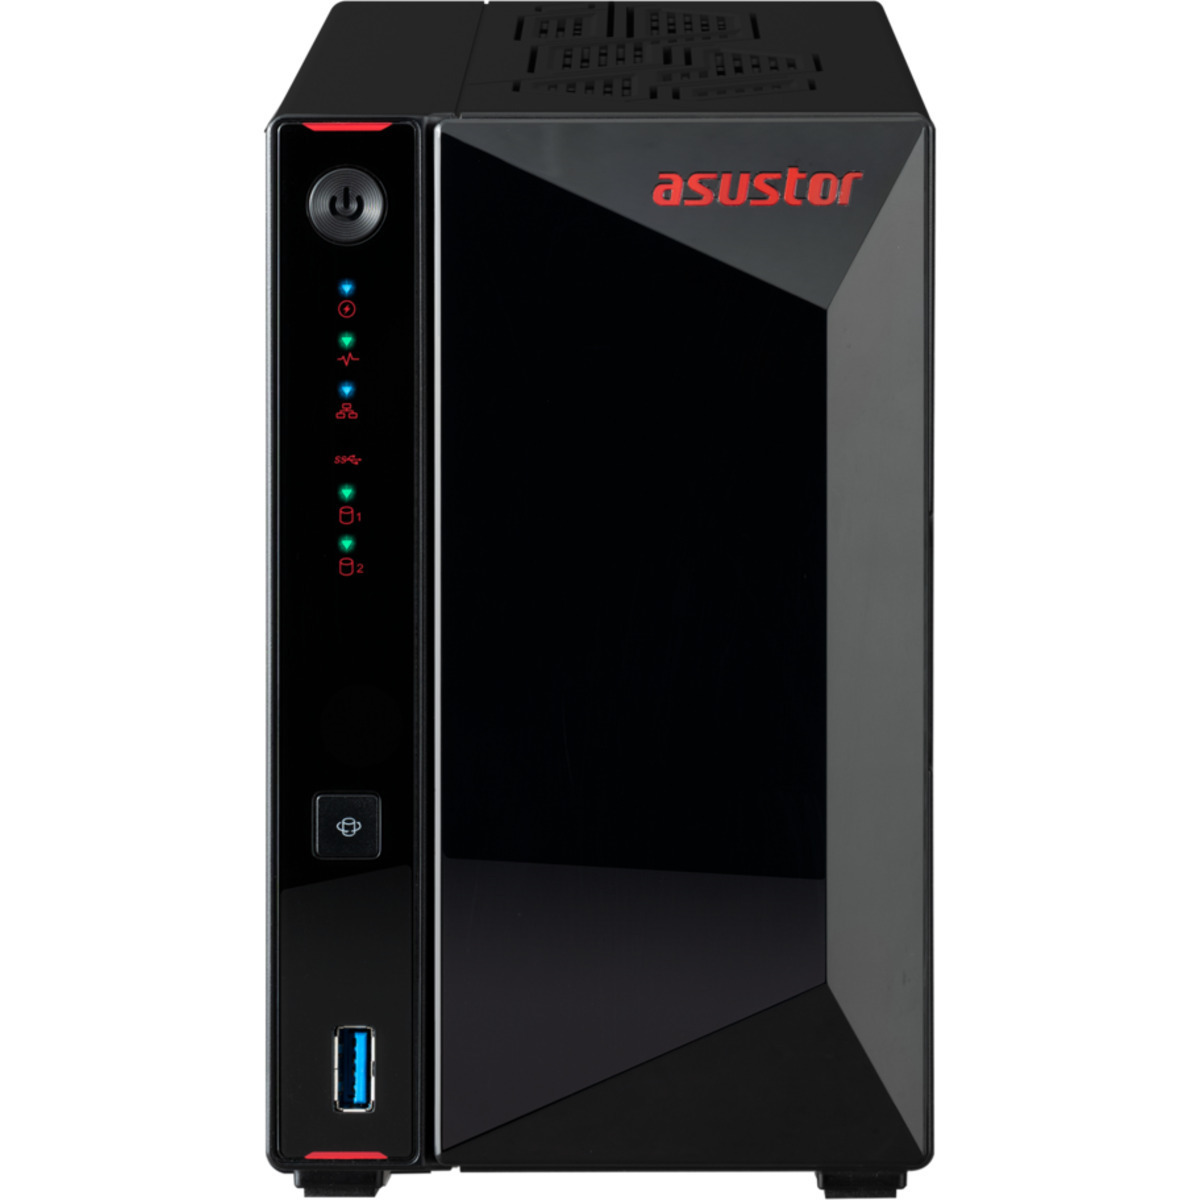 buy ASUSTOR Nimbustor 2 Gen2 AS5402T 8tb Desktop NAS - Network Attached Storage Device 2x4000gb Toshiba MN Series MN08ADA400E 3.5 7200rpm SATA 6Gb/s HDD NAS Class Drives Installed - Burn-In Tested - ON SALE - FREE RAM UPGRADE - nas headquarters buy network attached storage server device das new raid-5 free shipping simply usa christmas holiday black friday cyber monday week sale happening now! Nimbustor 2 Gen2 AS5402T